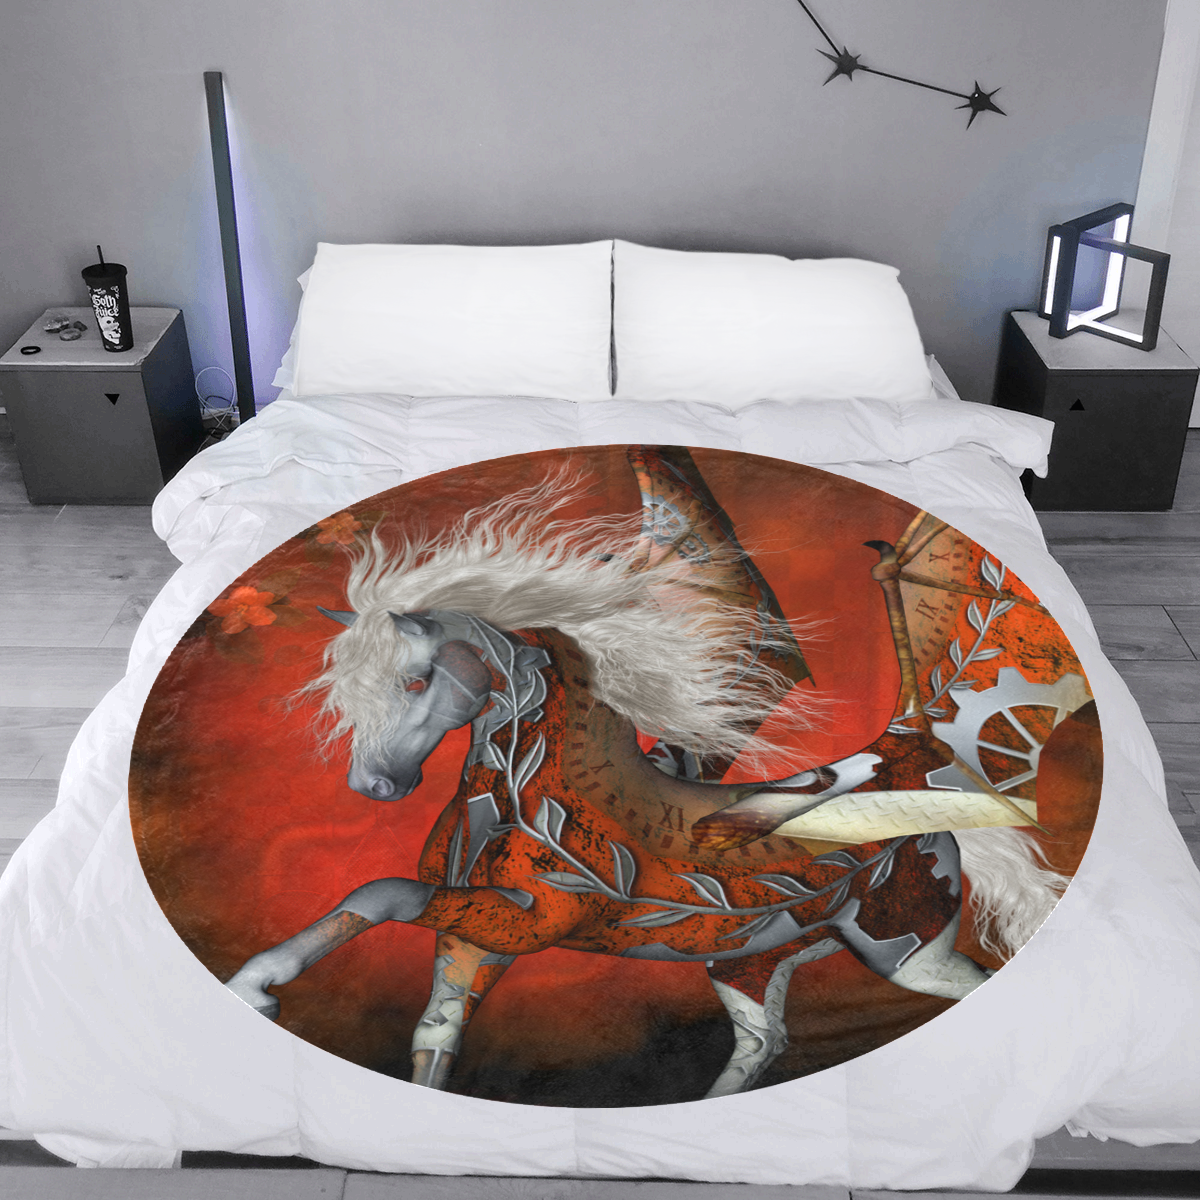 Awesome steampunk horse with wings Circular Ultra-Soft Micro Fleece Blanket 60"